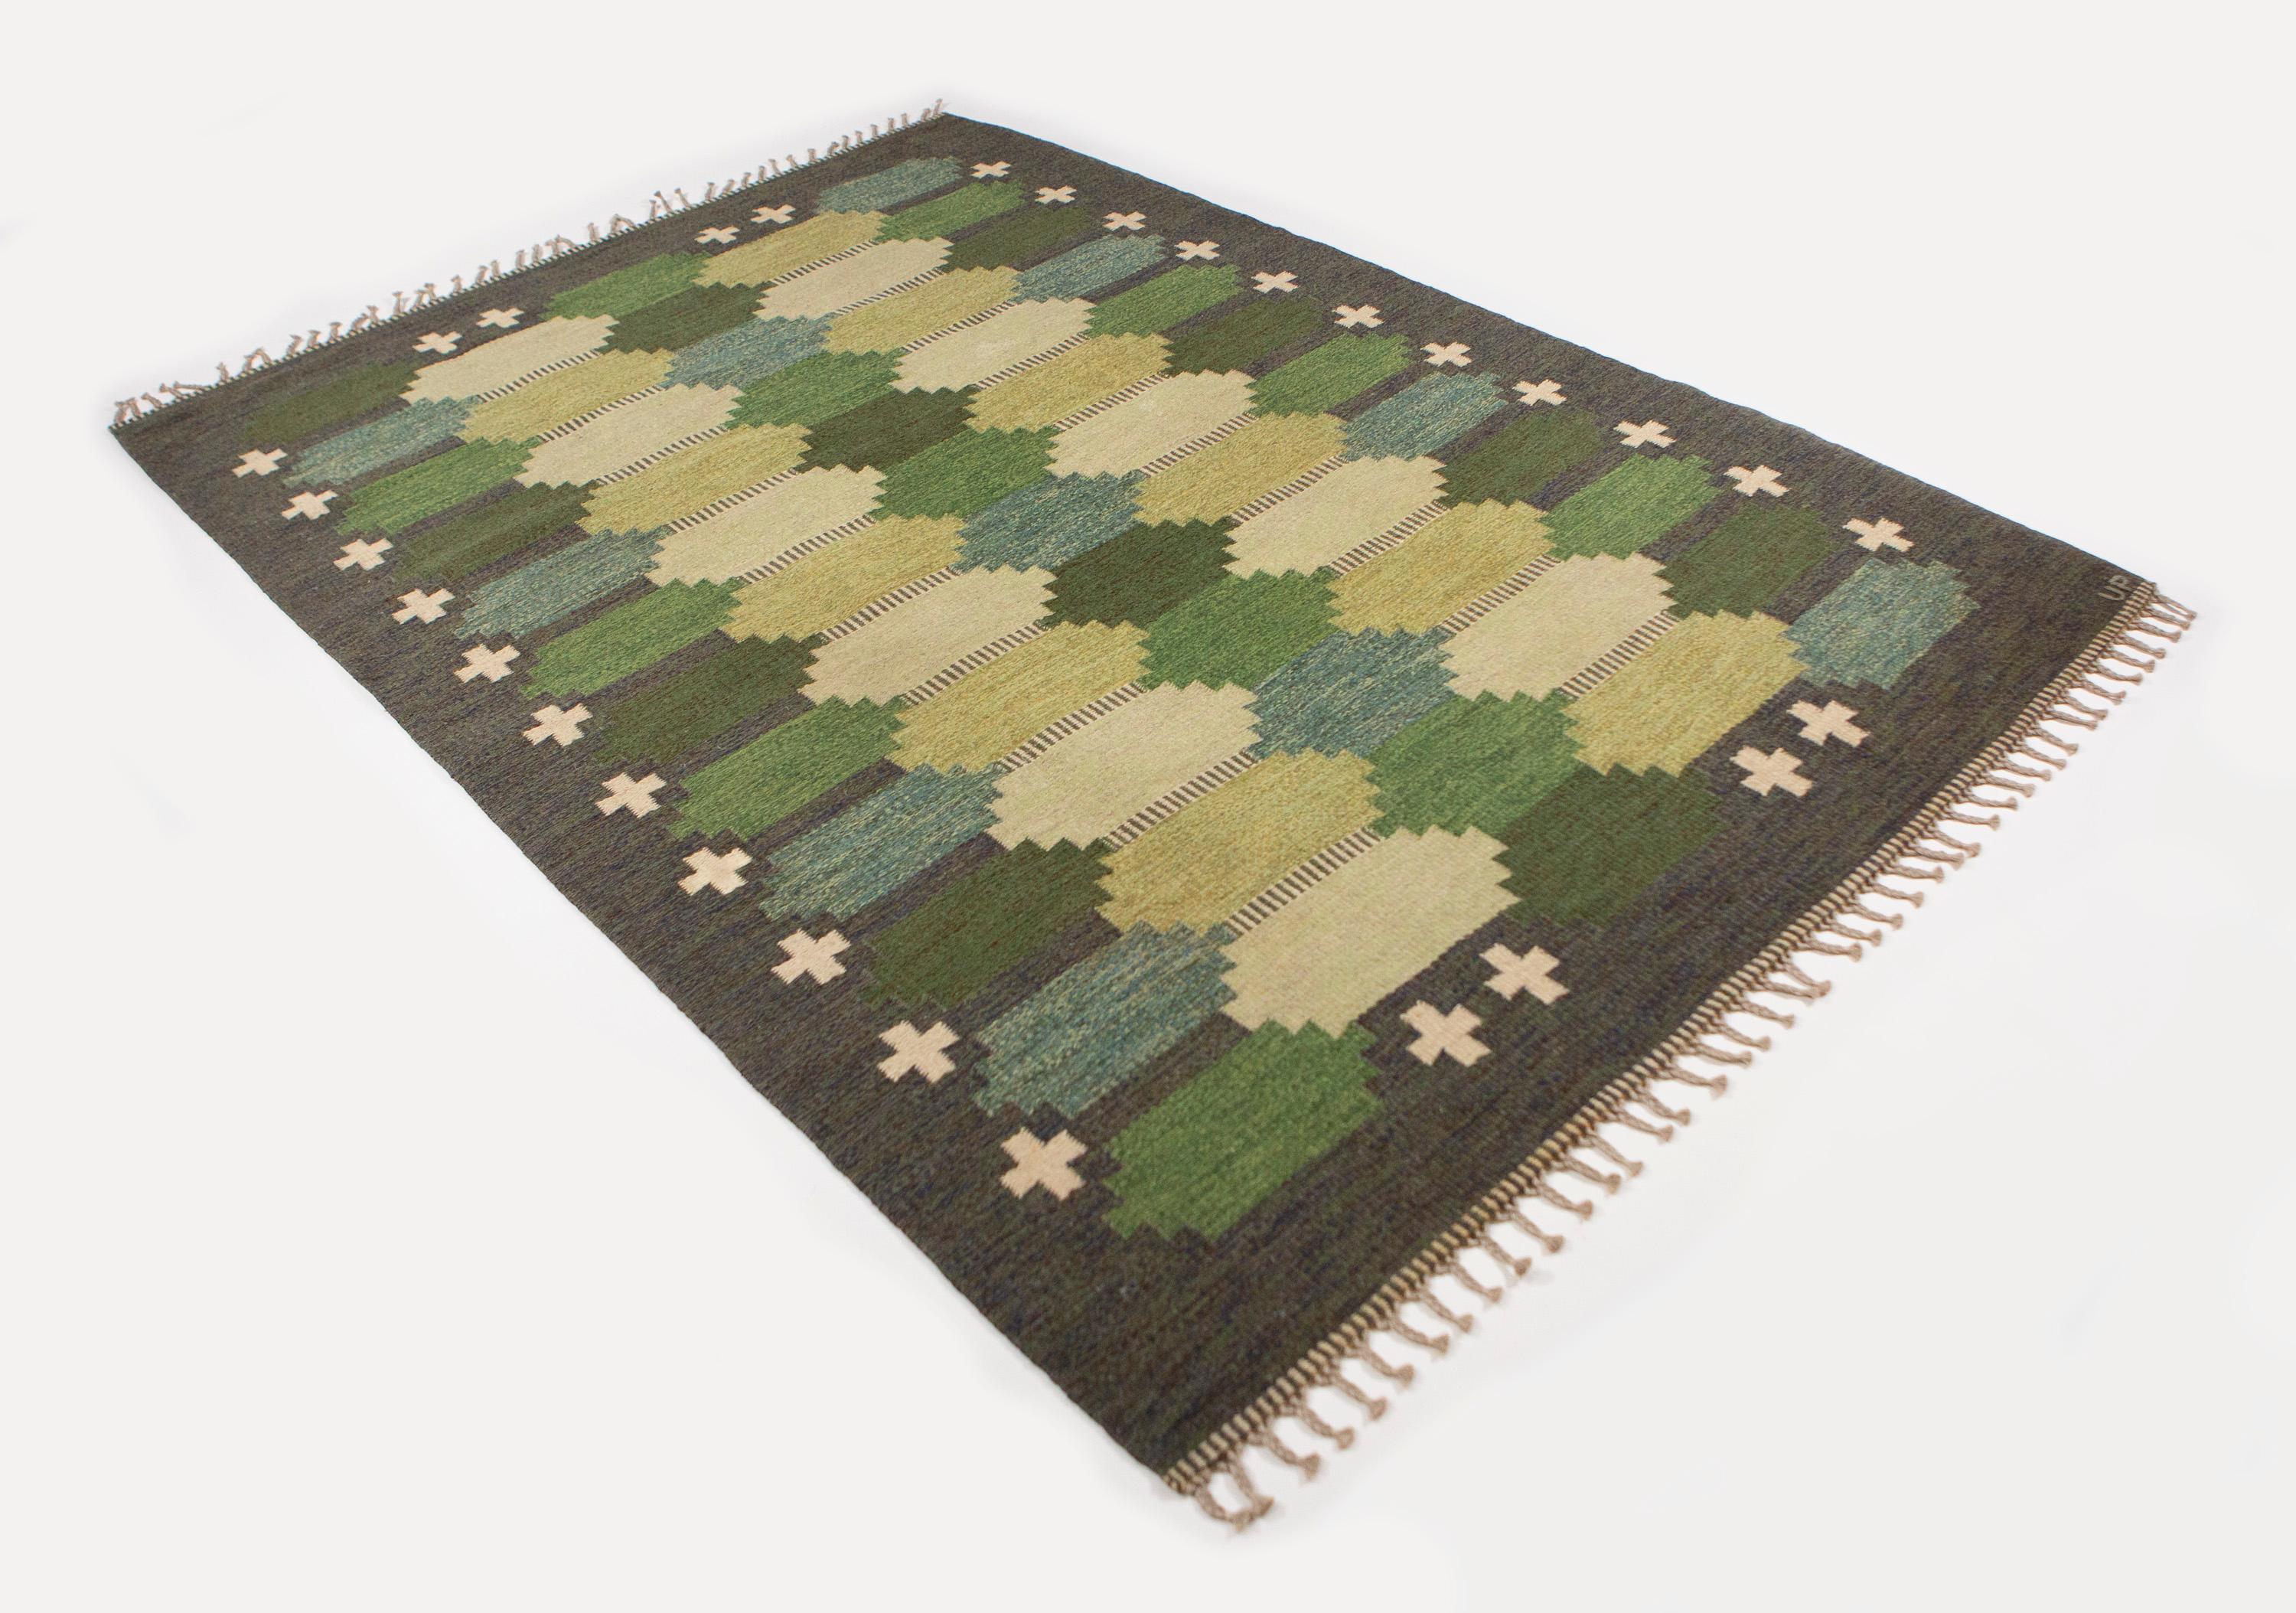 Hand-Woven Ulla Parkdal Green Swedish Flat Weave Hand Woven Rug Signed Up Sweden, 1960's